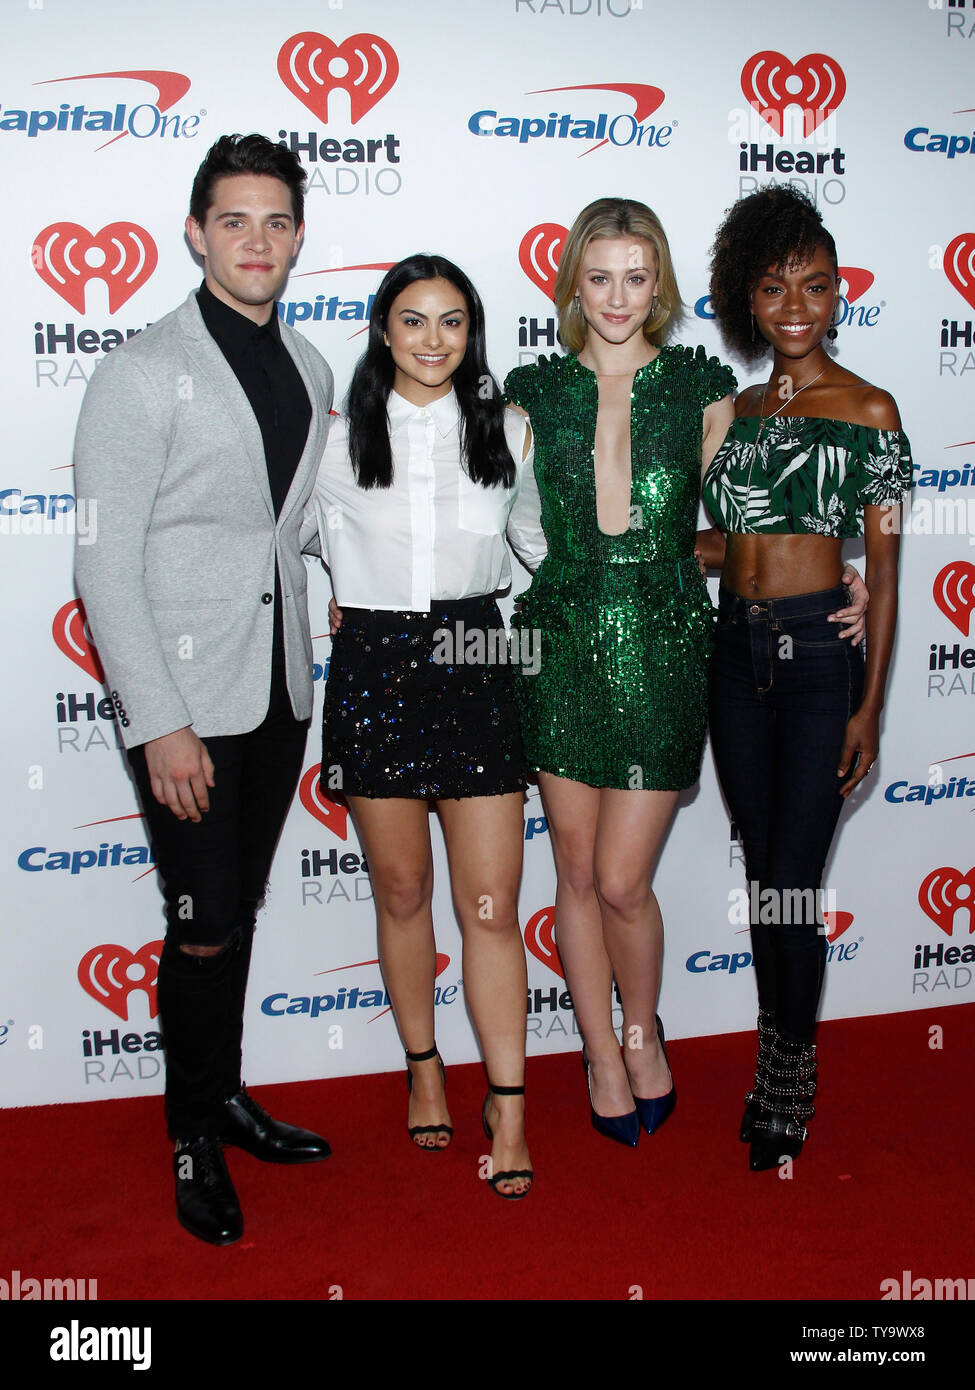 Actors Casey Colt, Camila Mendes, Lili Reinhart and Ashleigh Murray of the CW TV show Riverdale attend the iHeartRadio Music Festival at T-Mobile Arena in Las Vegas, Nevada on September 23, 2017.  Photo by James Atoa/UPI Stock Photo